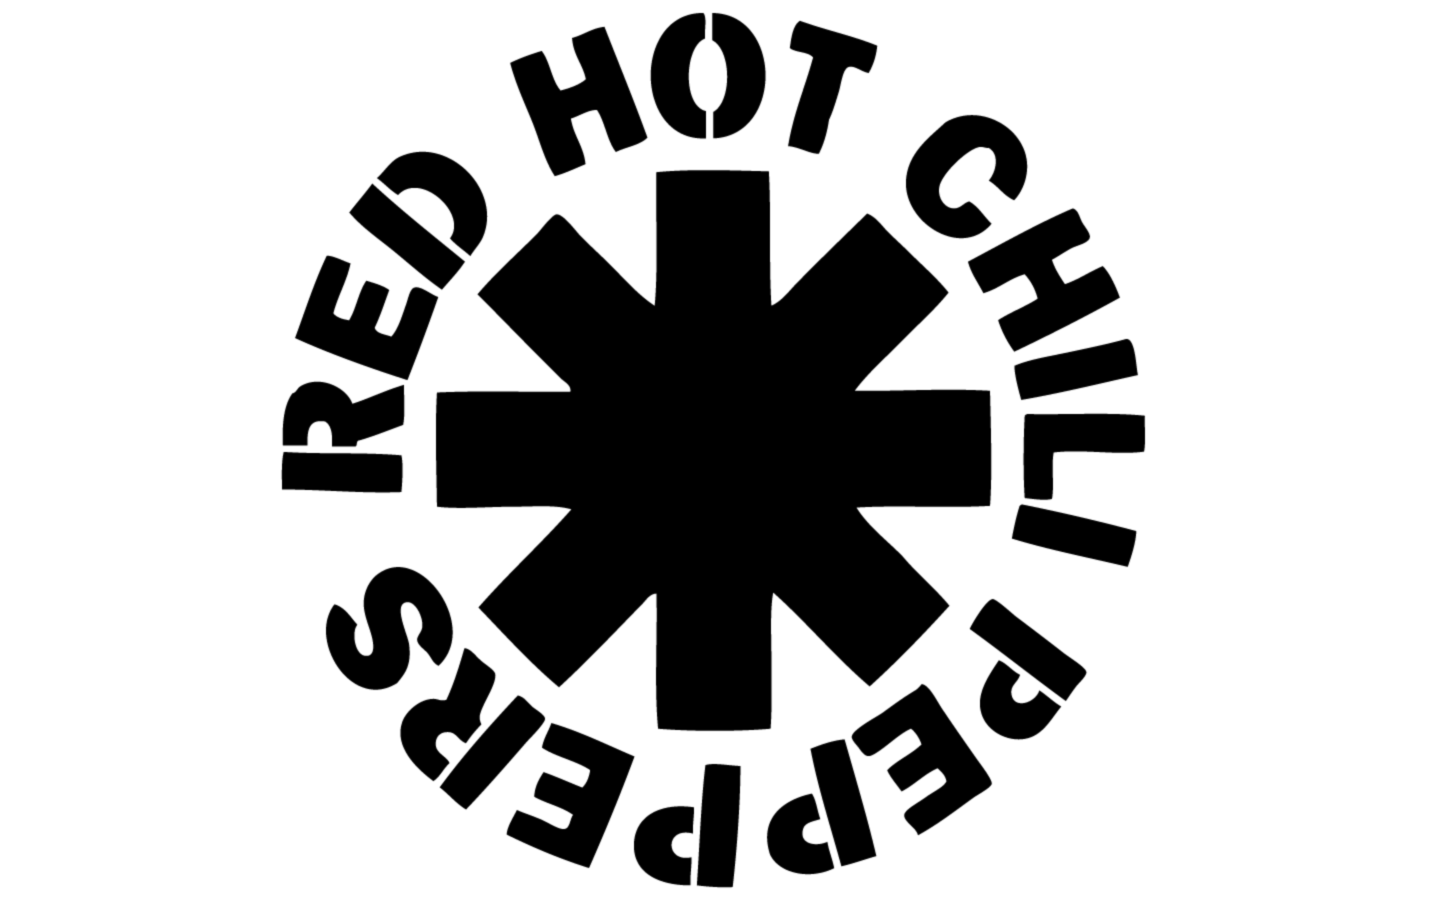 Red Hot Chili Peppers Logo - Red Hot Chili Peppers #logo. Red Hot Chili Peppers. Chili, Stuffed